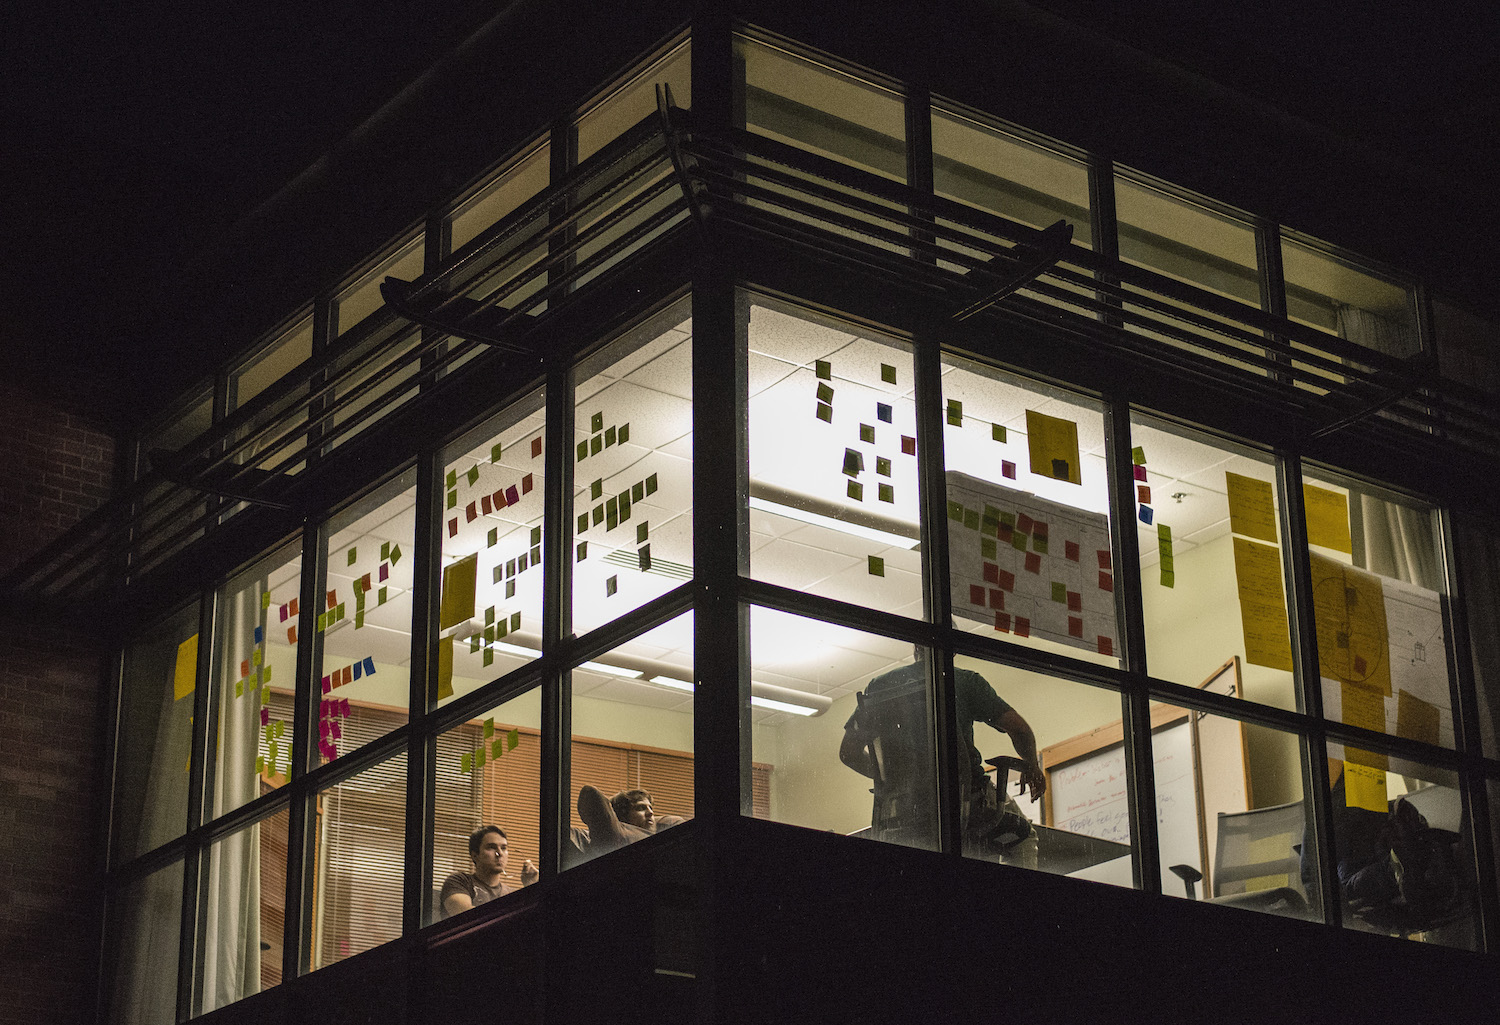 Post-it notes are all around windows of an office as people seem to be working inside, late at night